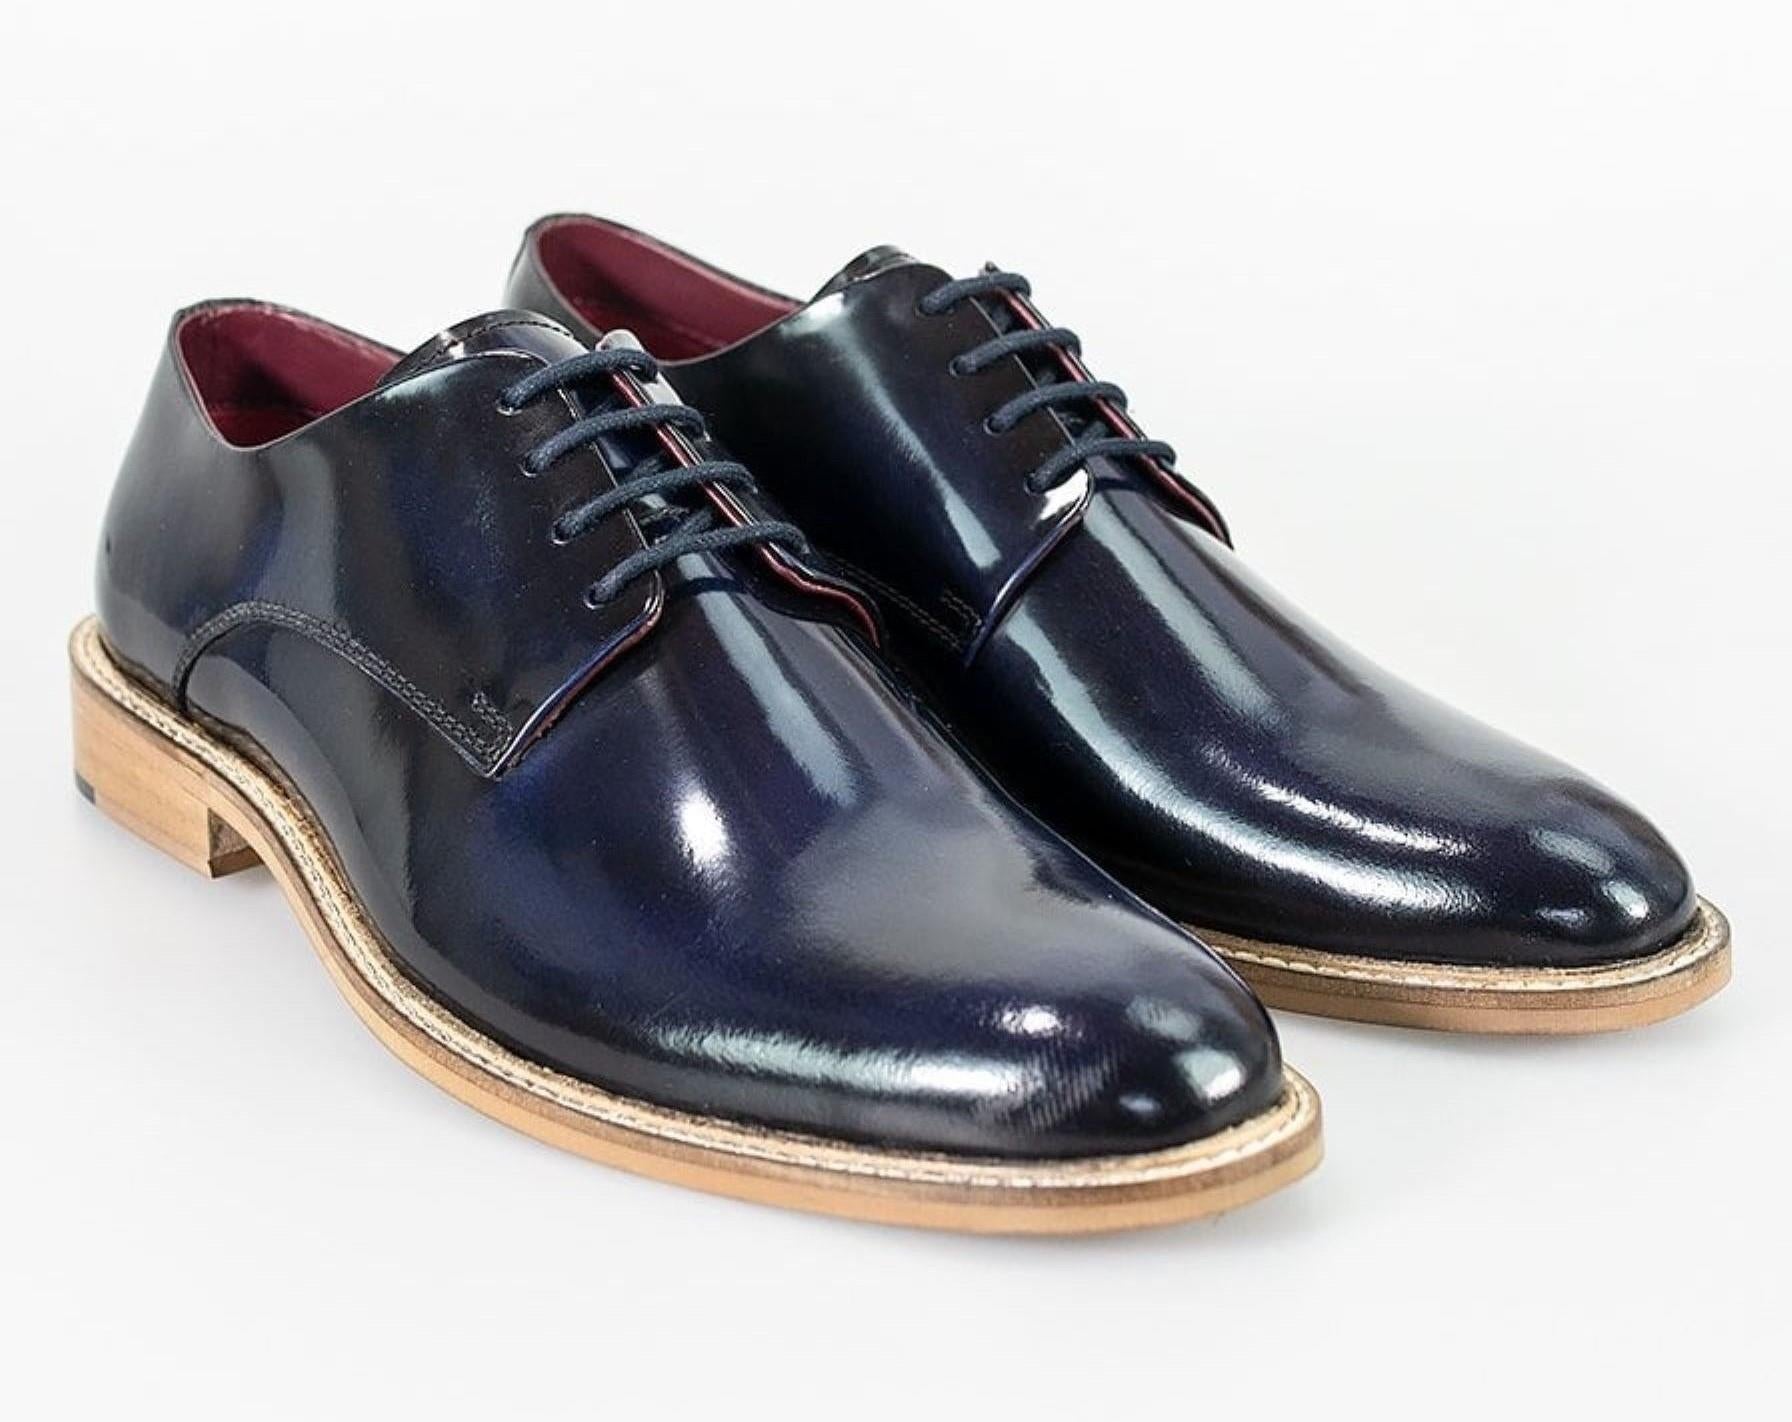 Mens Retro Oxford Brogue Derby Shoes in Navy Patent Leather